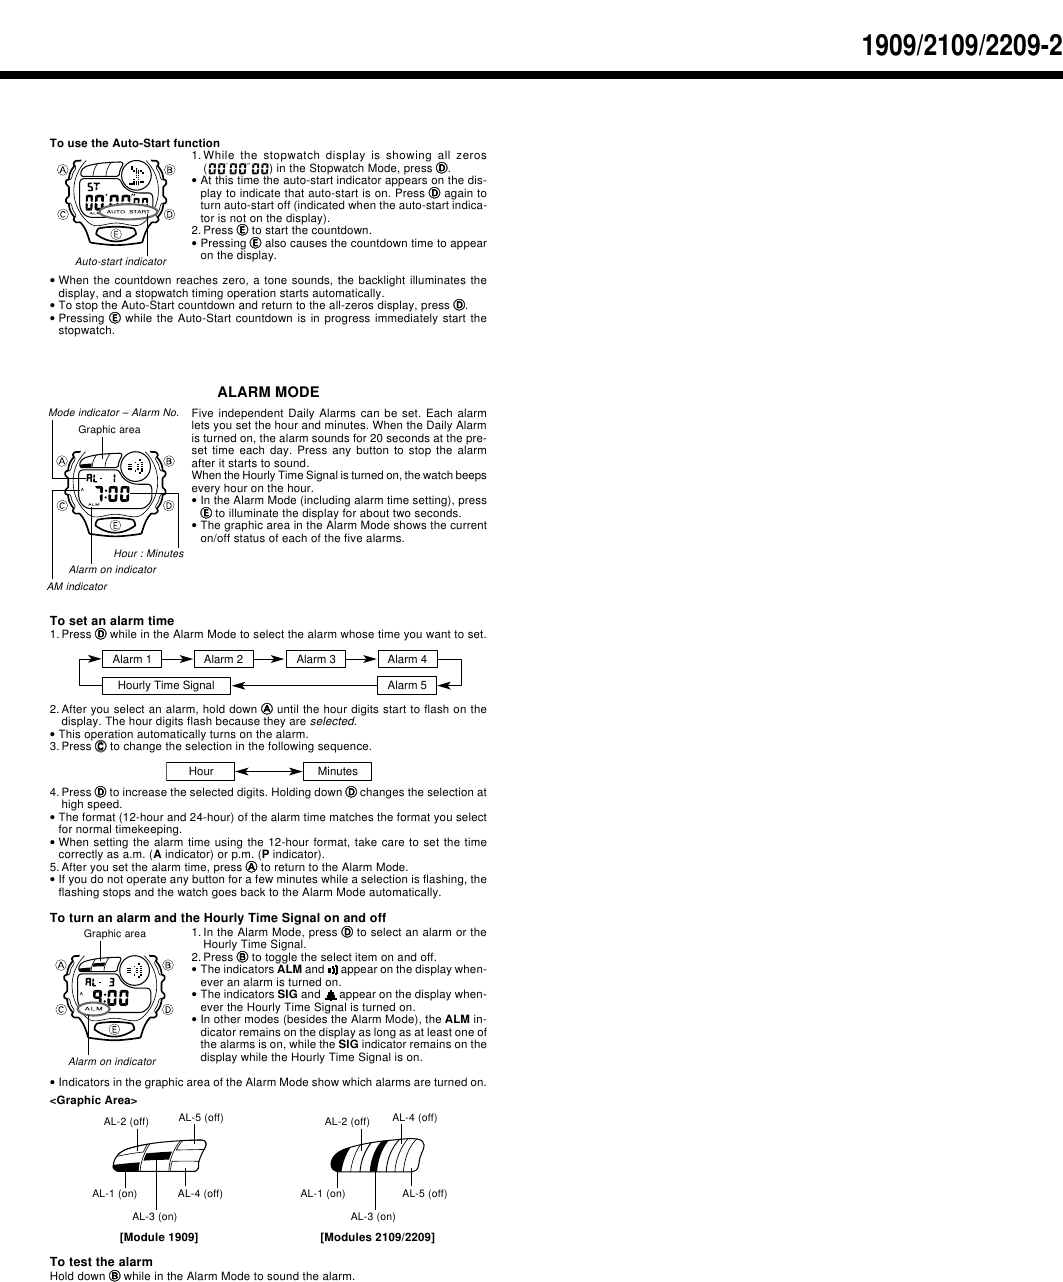 Page 2 of 2 - Casio Casio-Casio-Watch-2109-Users-Manual- QW-1909/2109/2209  Casio-casio-watch-2109-users-manual